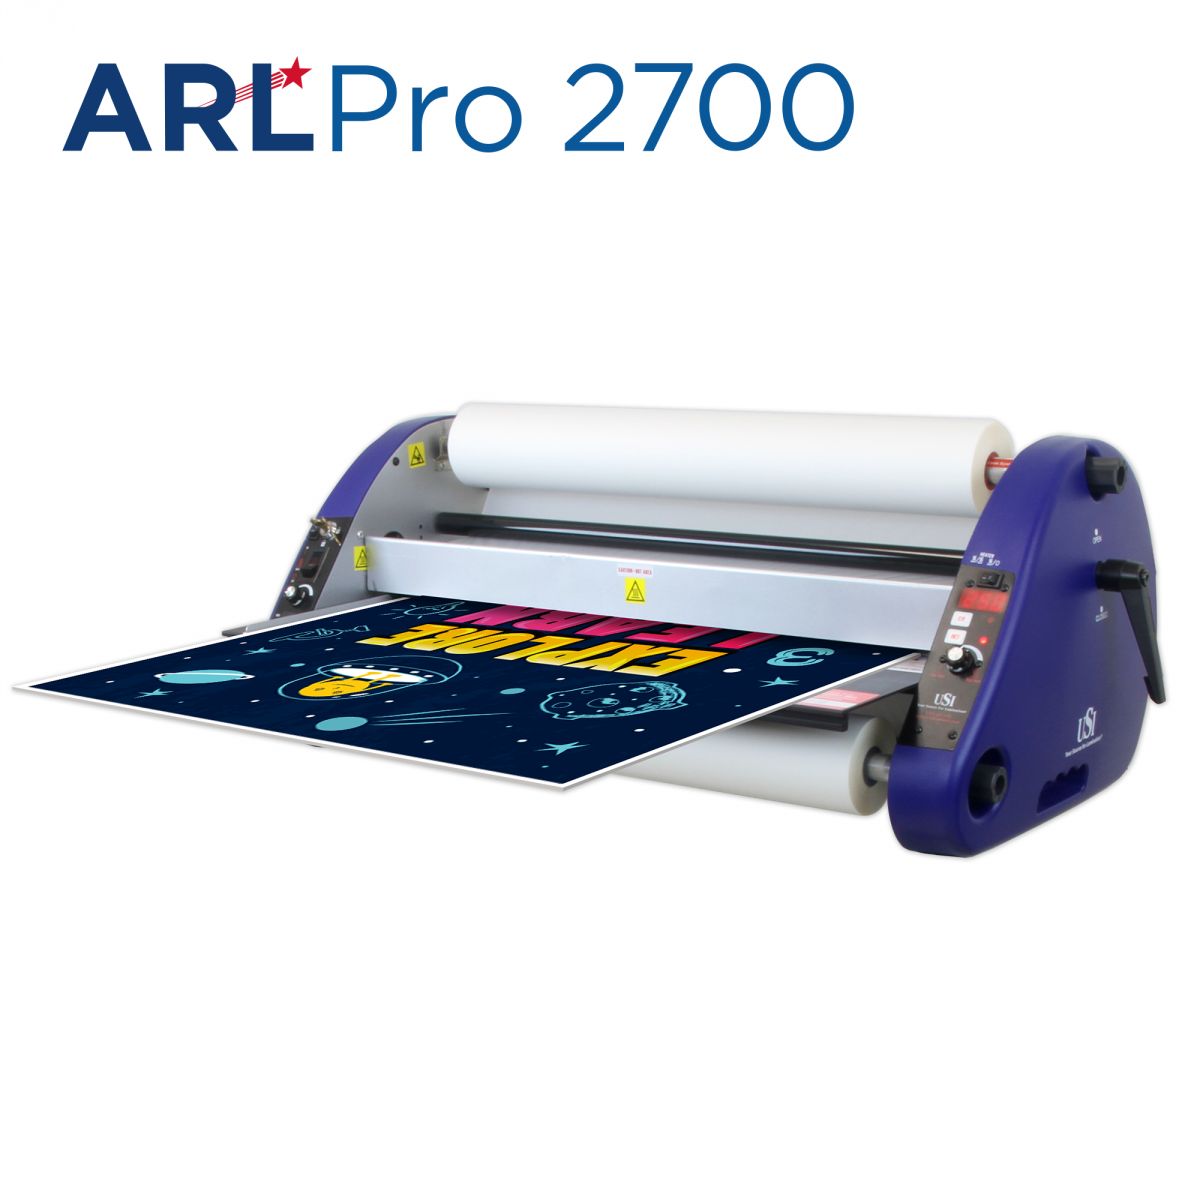 USI ARL Pro 2700 27" Mounting Roll Laminator - $1,811.76 Price Includes Shipping in the Continental USA